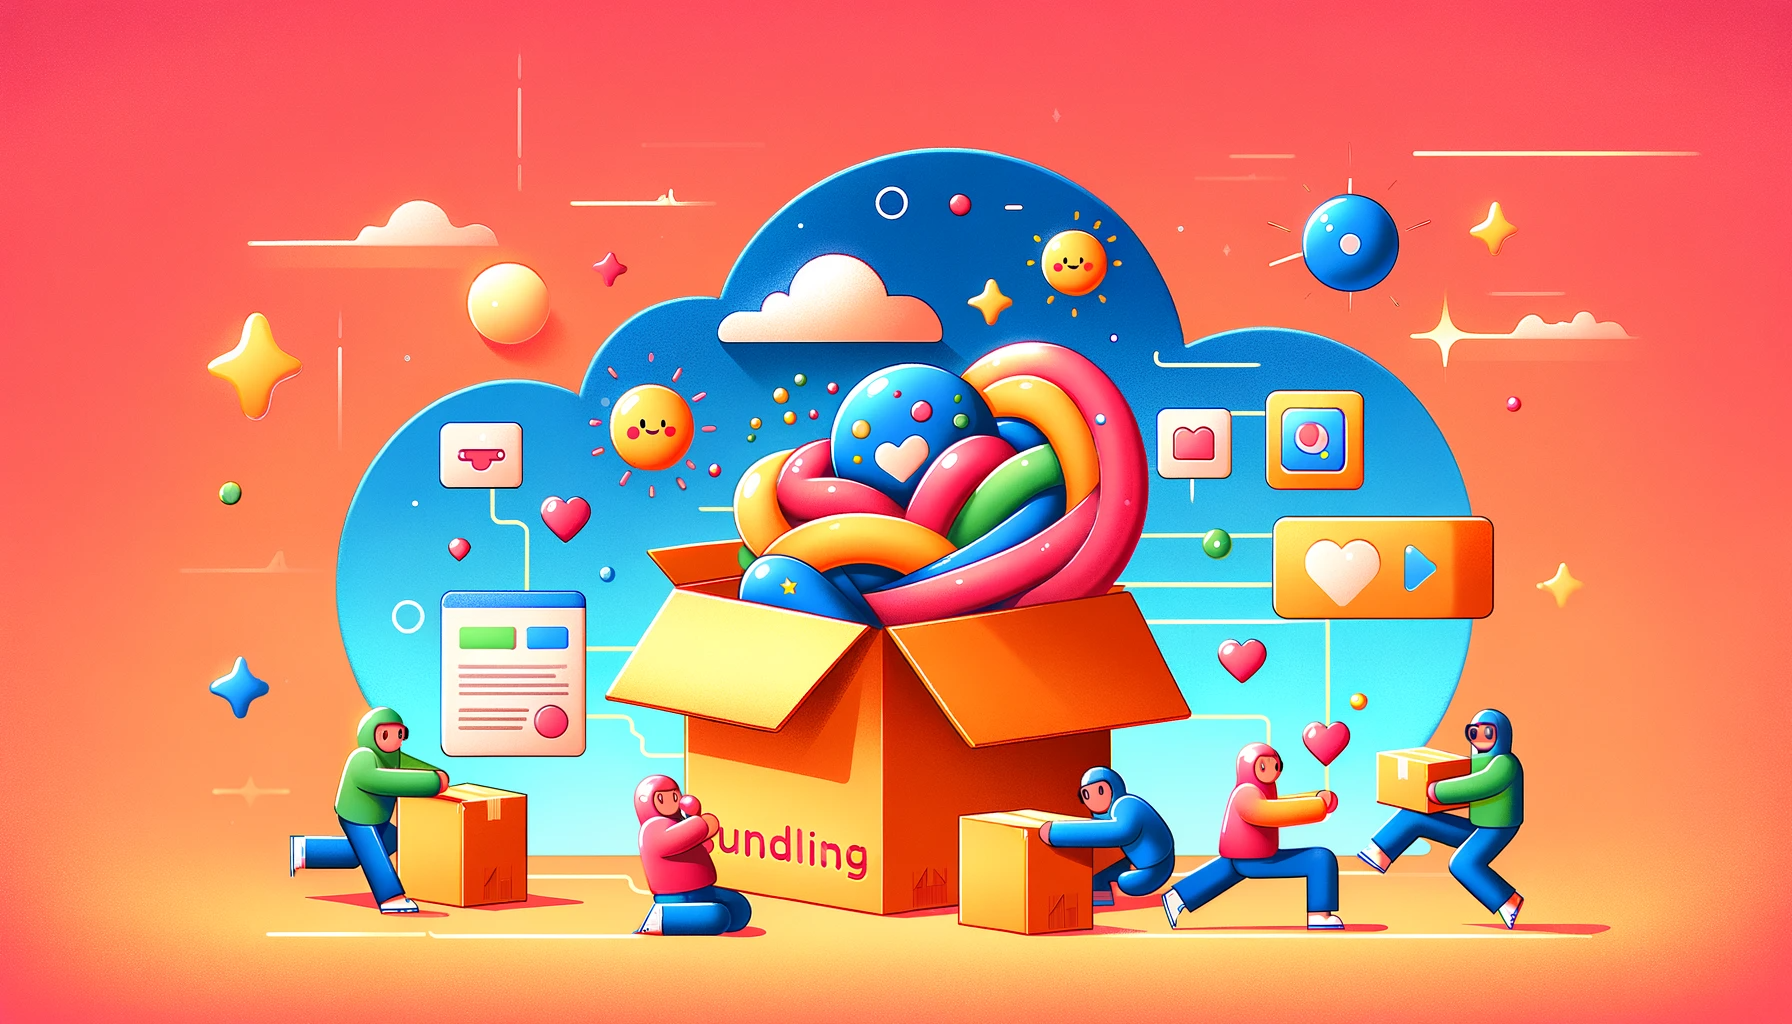 A playful and colorful illustration that captures the concept of bundling in a tech context